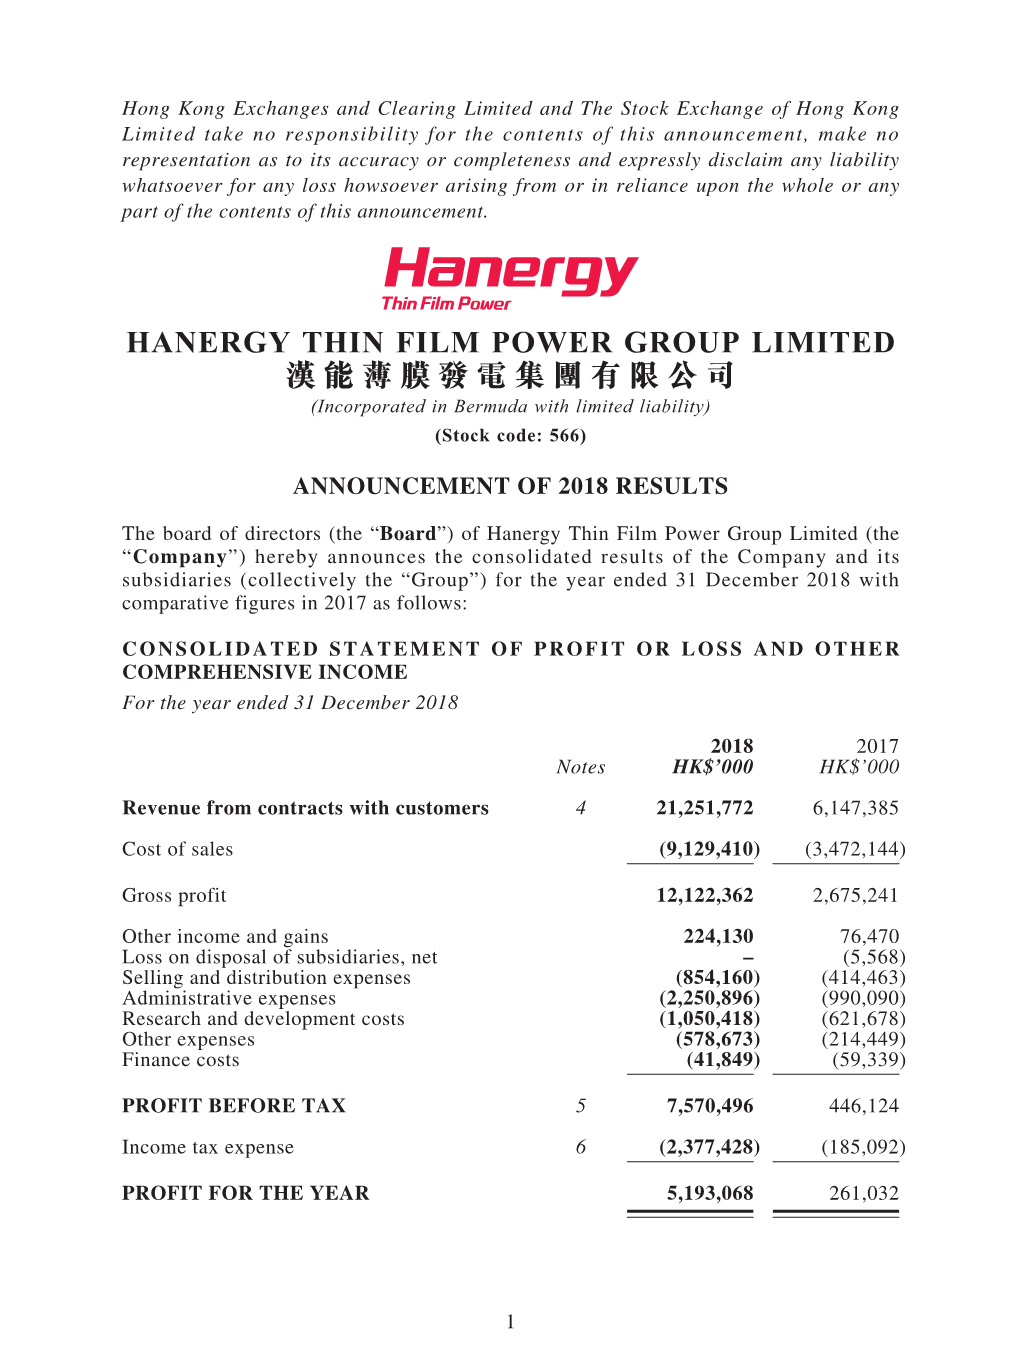 HANERGY THIN FILM POWER GROUP LIMITED 漢能薄膜發電集團有限公司 (Incorporated in Bermuda with Limited Liability) (Stock Code: 566)